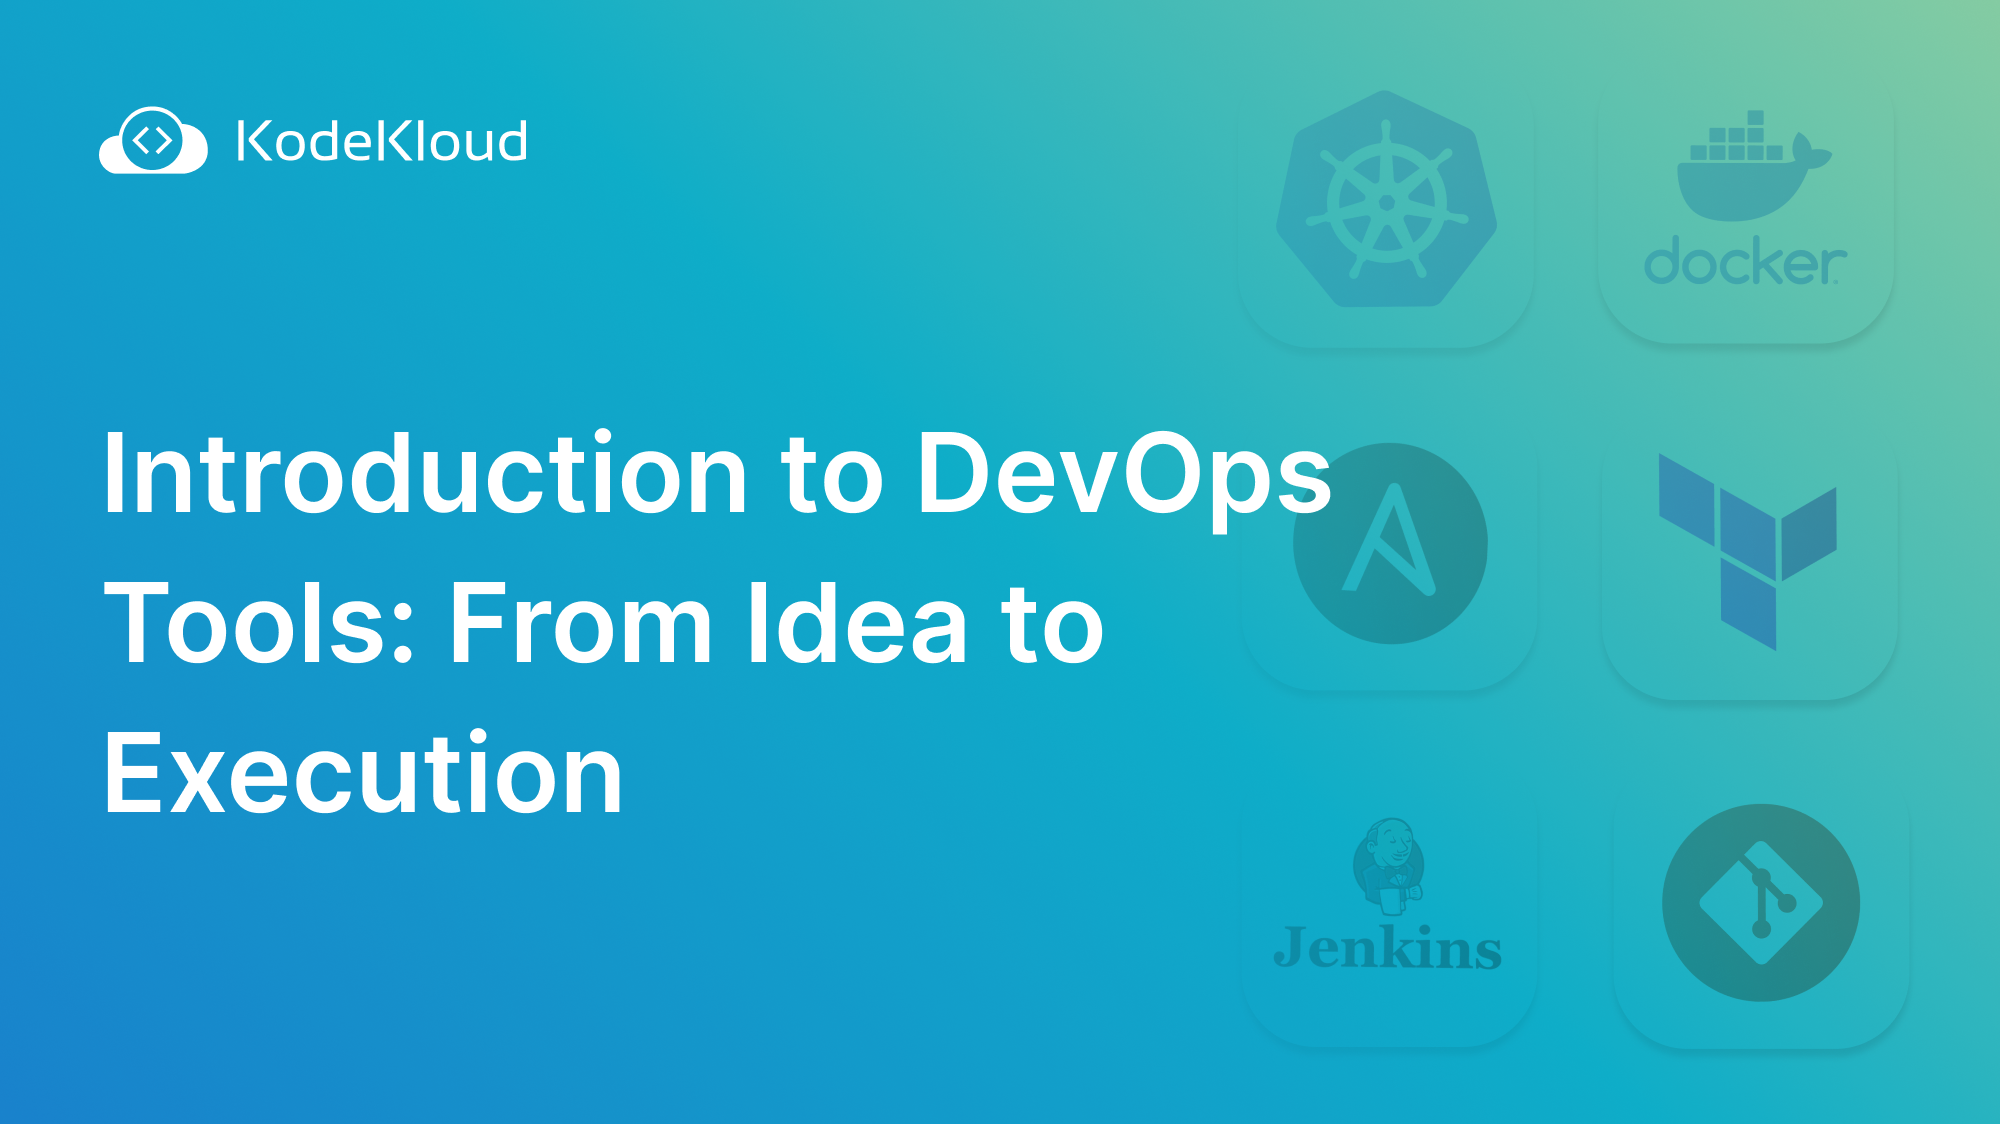 Introduction to DevOps Tools: From Idea to Execution